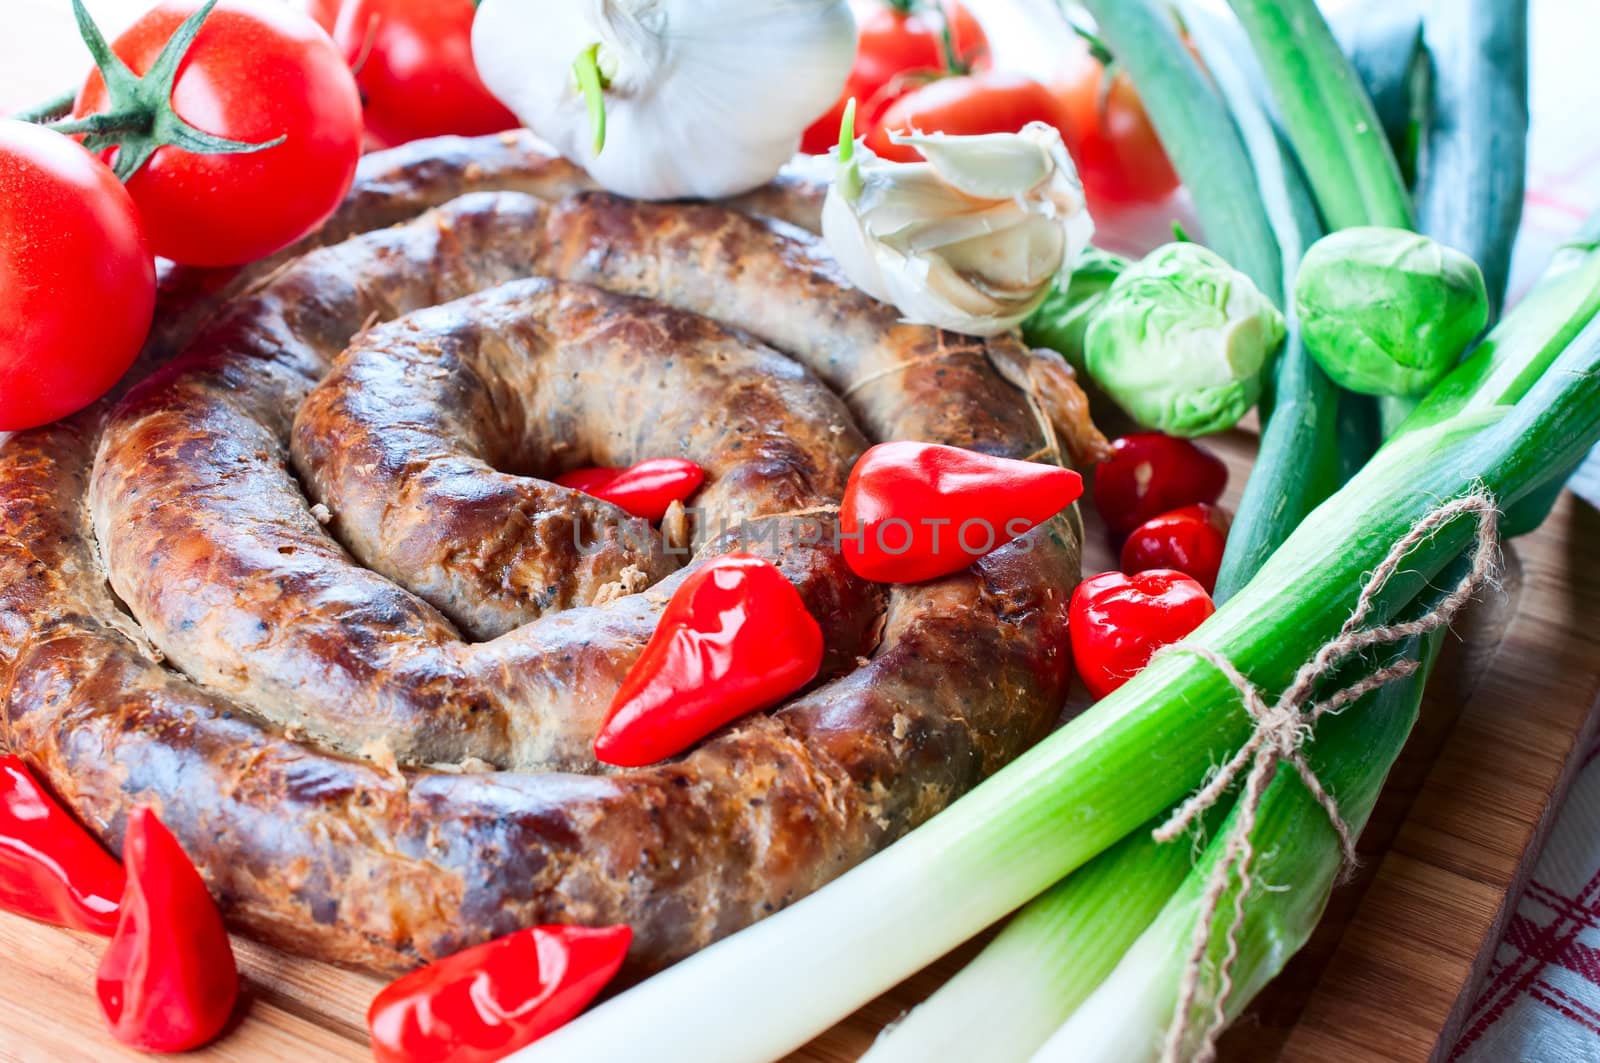 Sausage with spices by Nanisimova